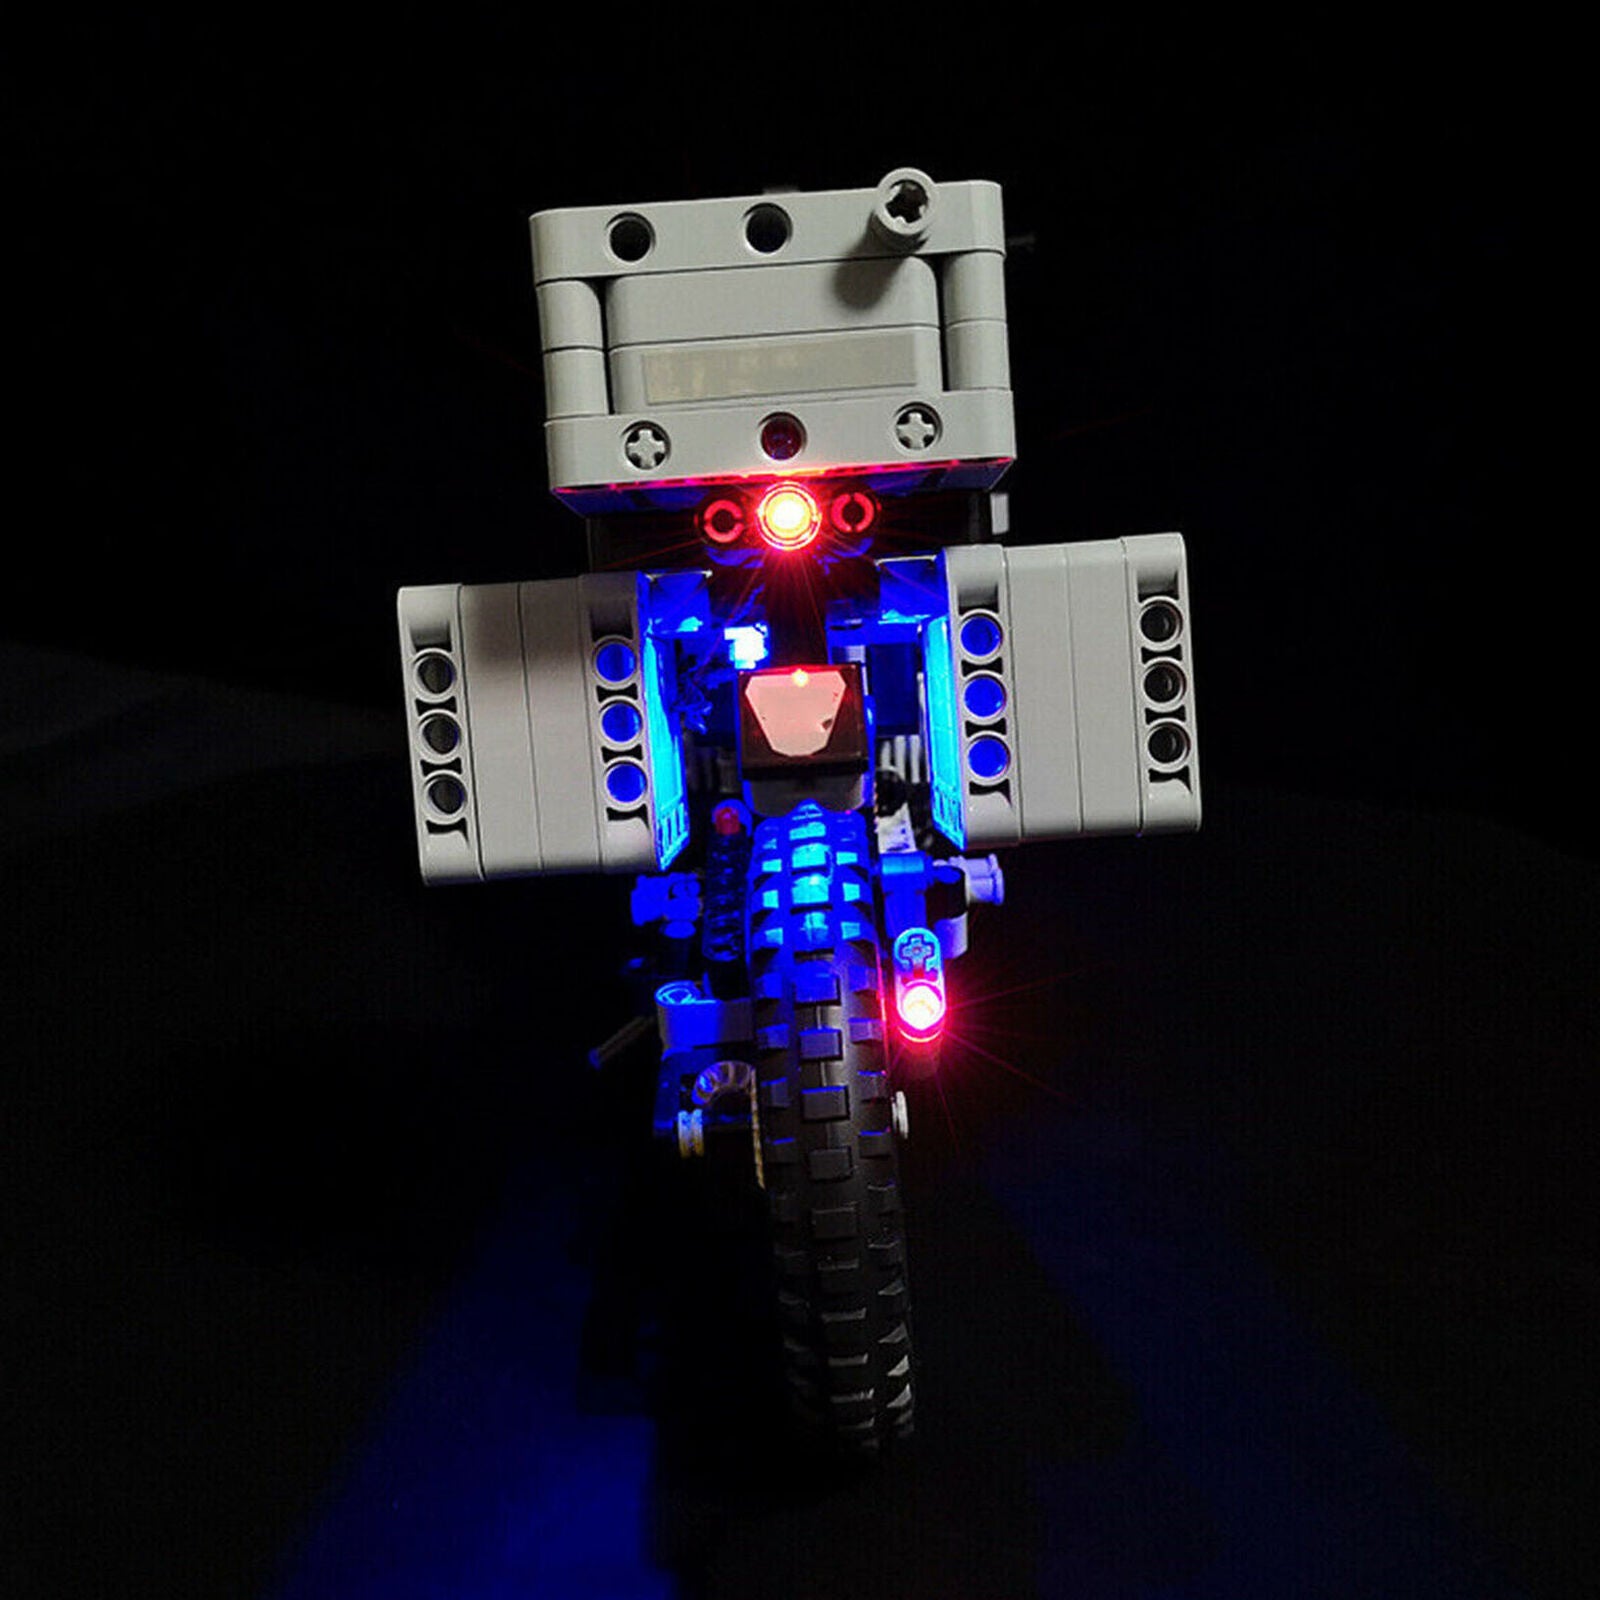 LED Light For LEGO 42063 For BMW R 1200 GS Adventure Technic Series